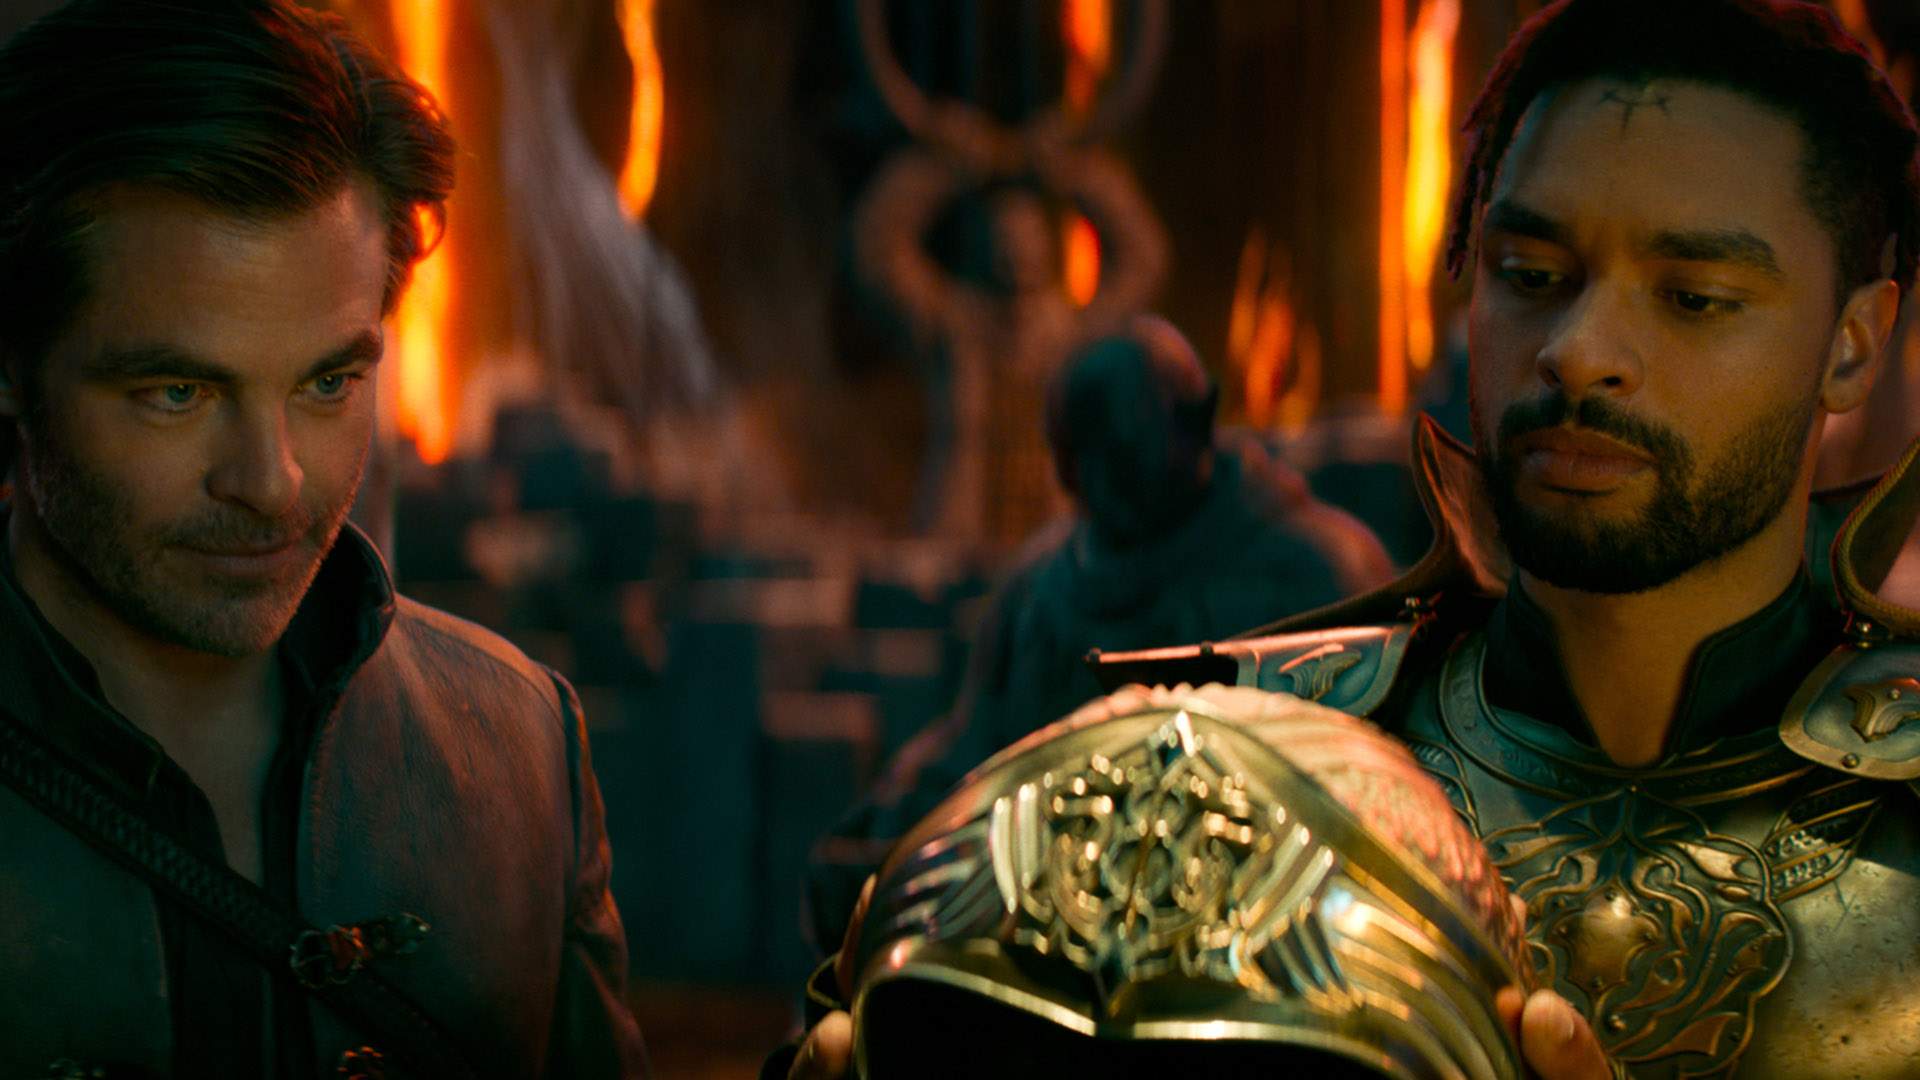 Chris Pine and Rege-Jean Page Roll the Dice in the 'Dungeons & Dragons: Honour Among Thieves' Trailer